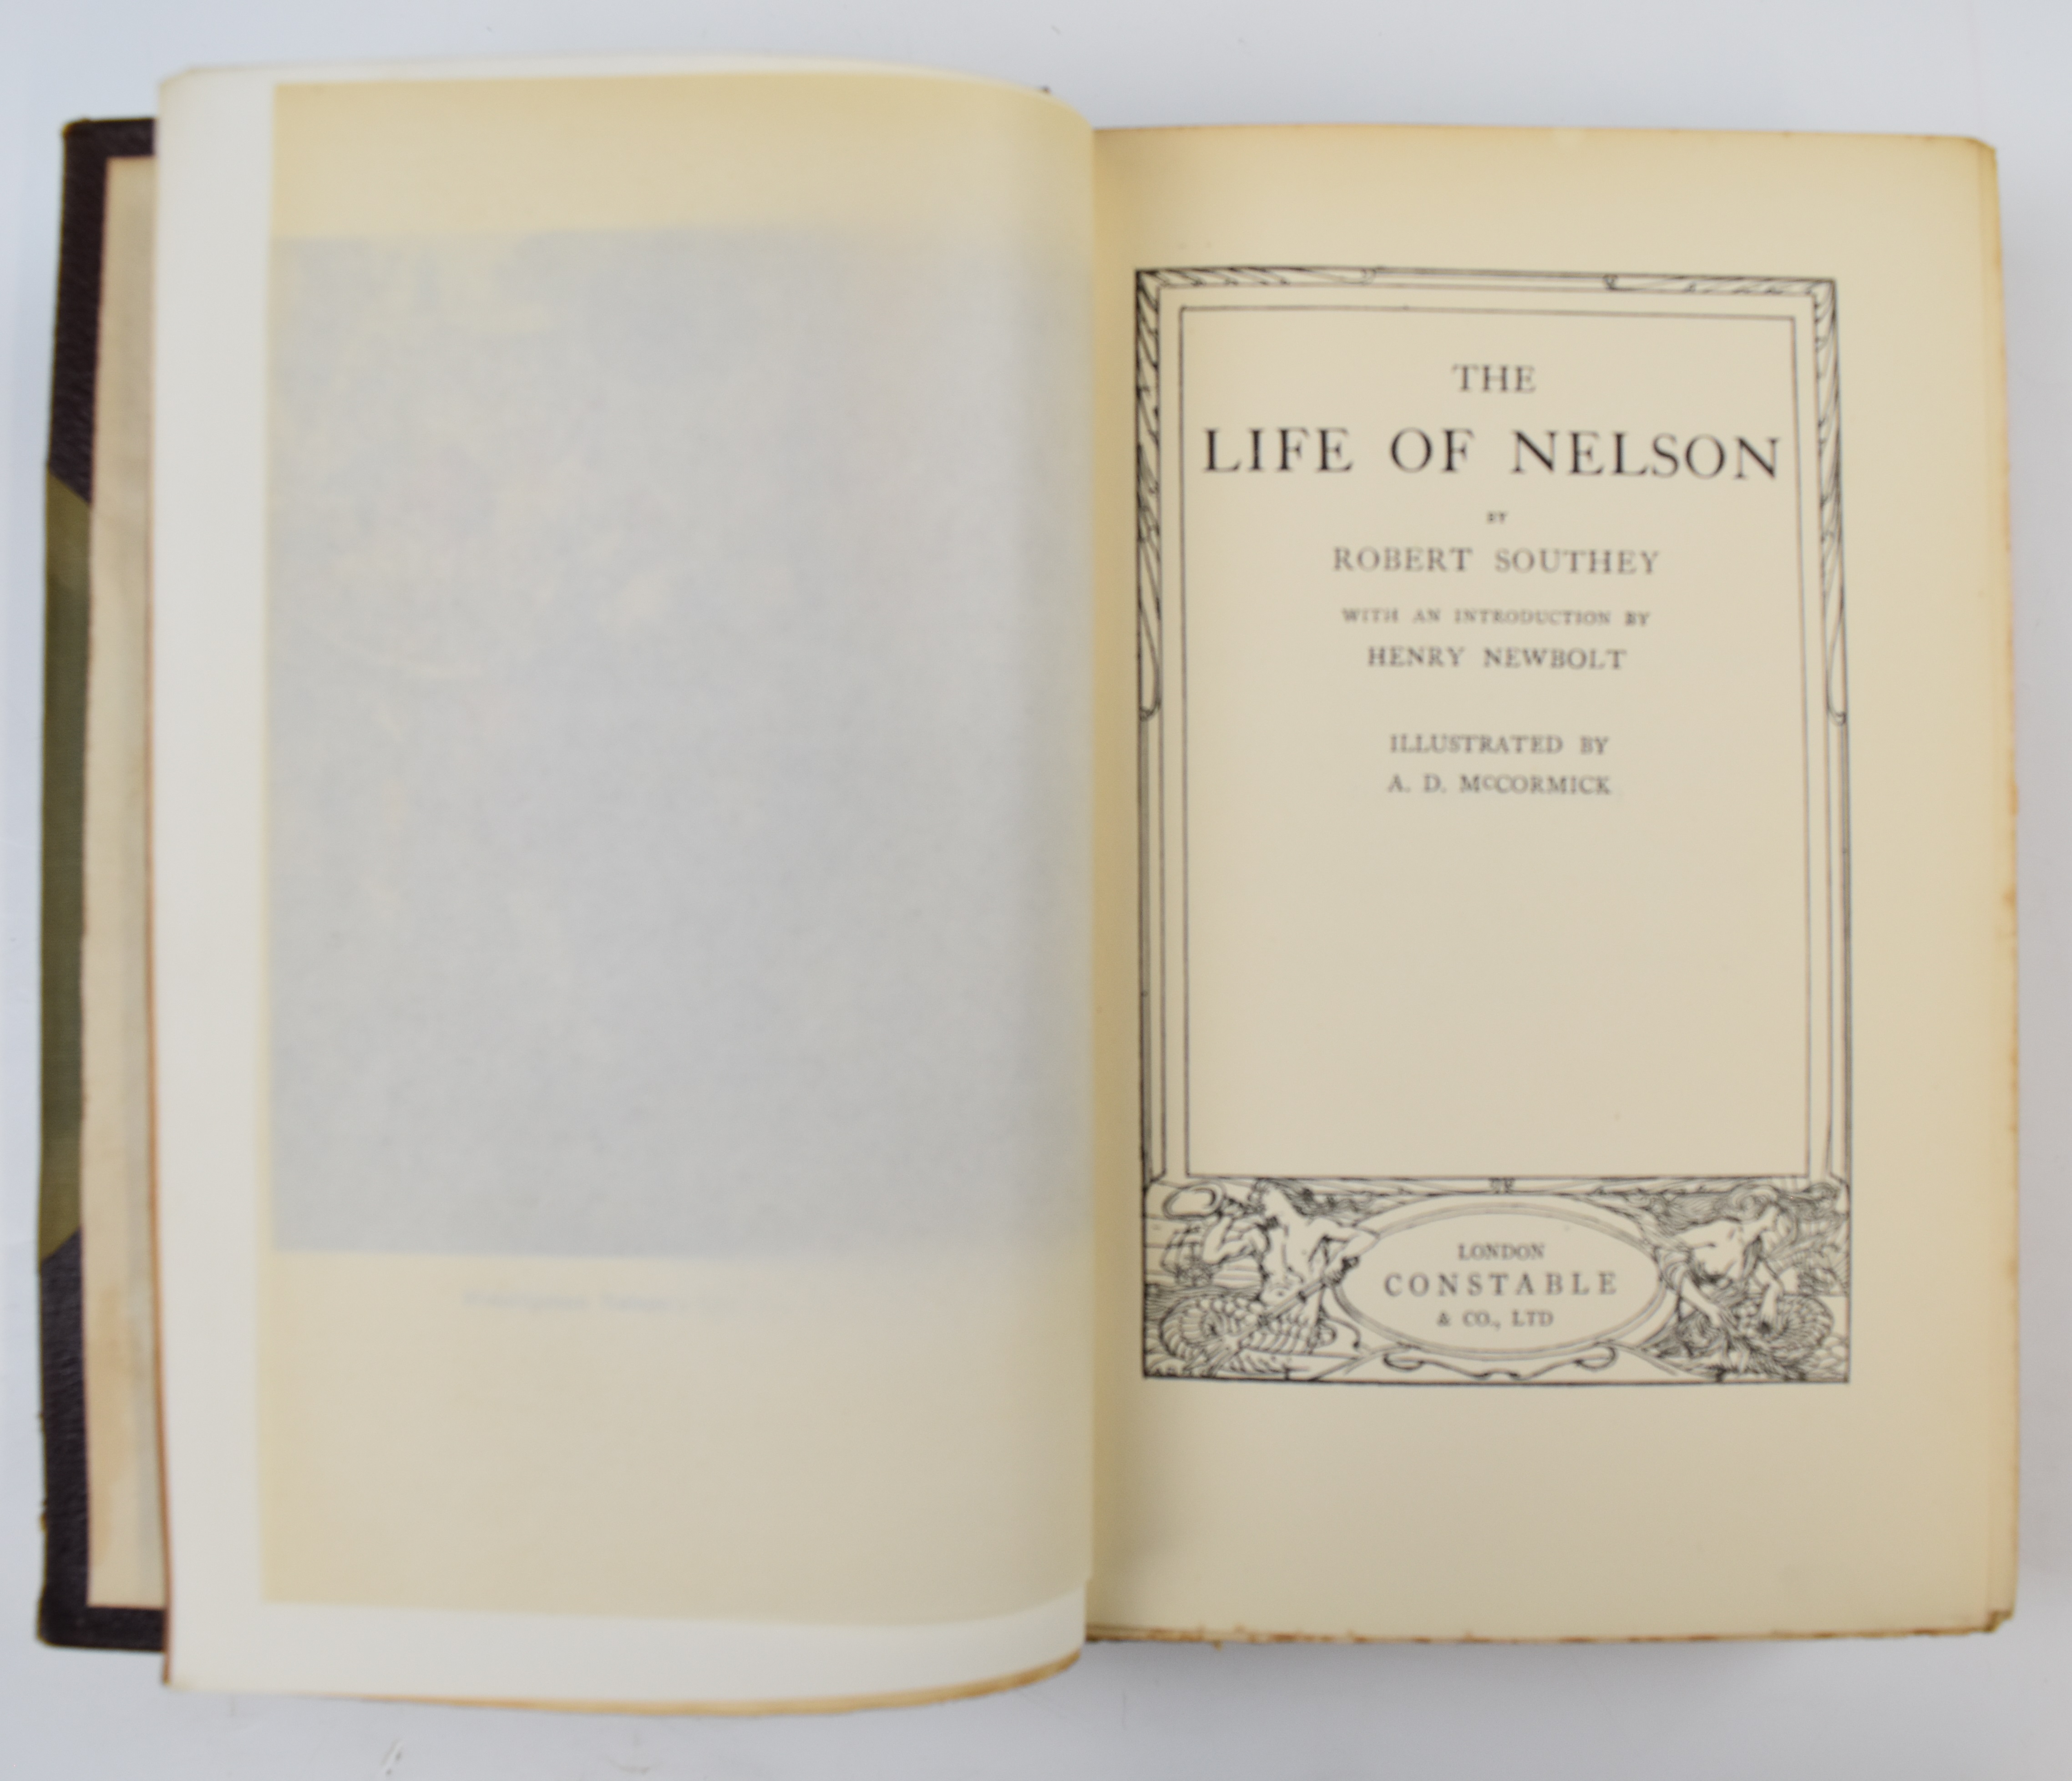 The Life of Nelson by Robert Southey illustrated by A.D. McCormick 1916, in half leather. - Image 4 of 4